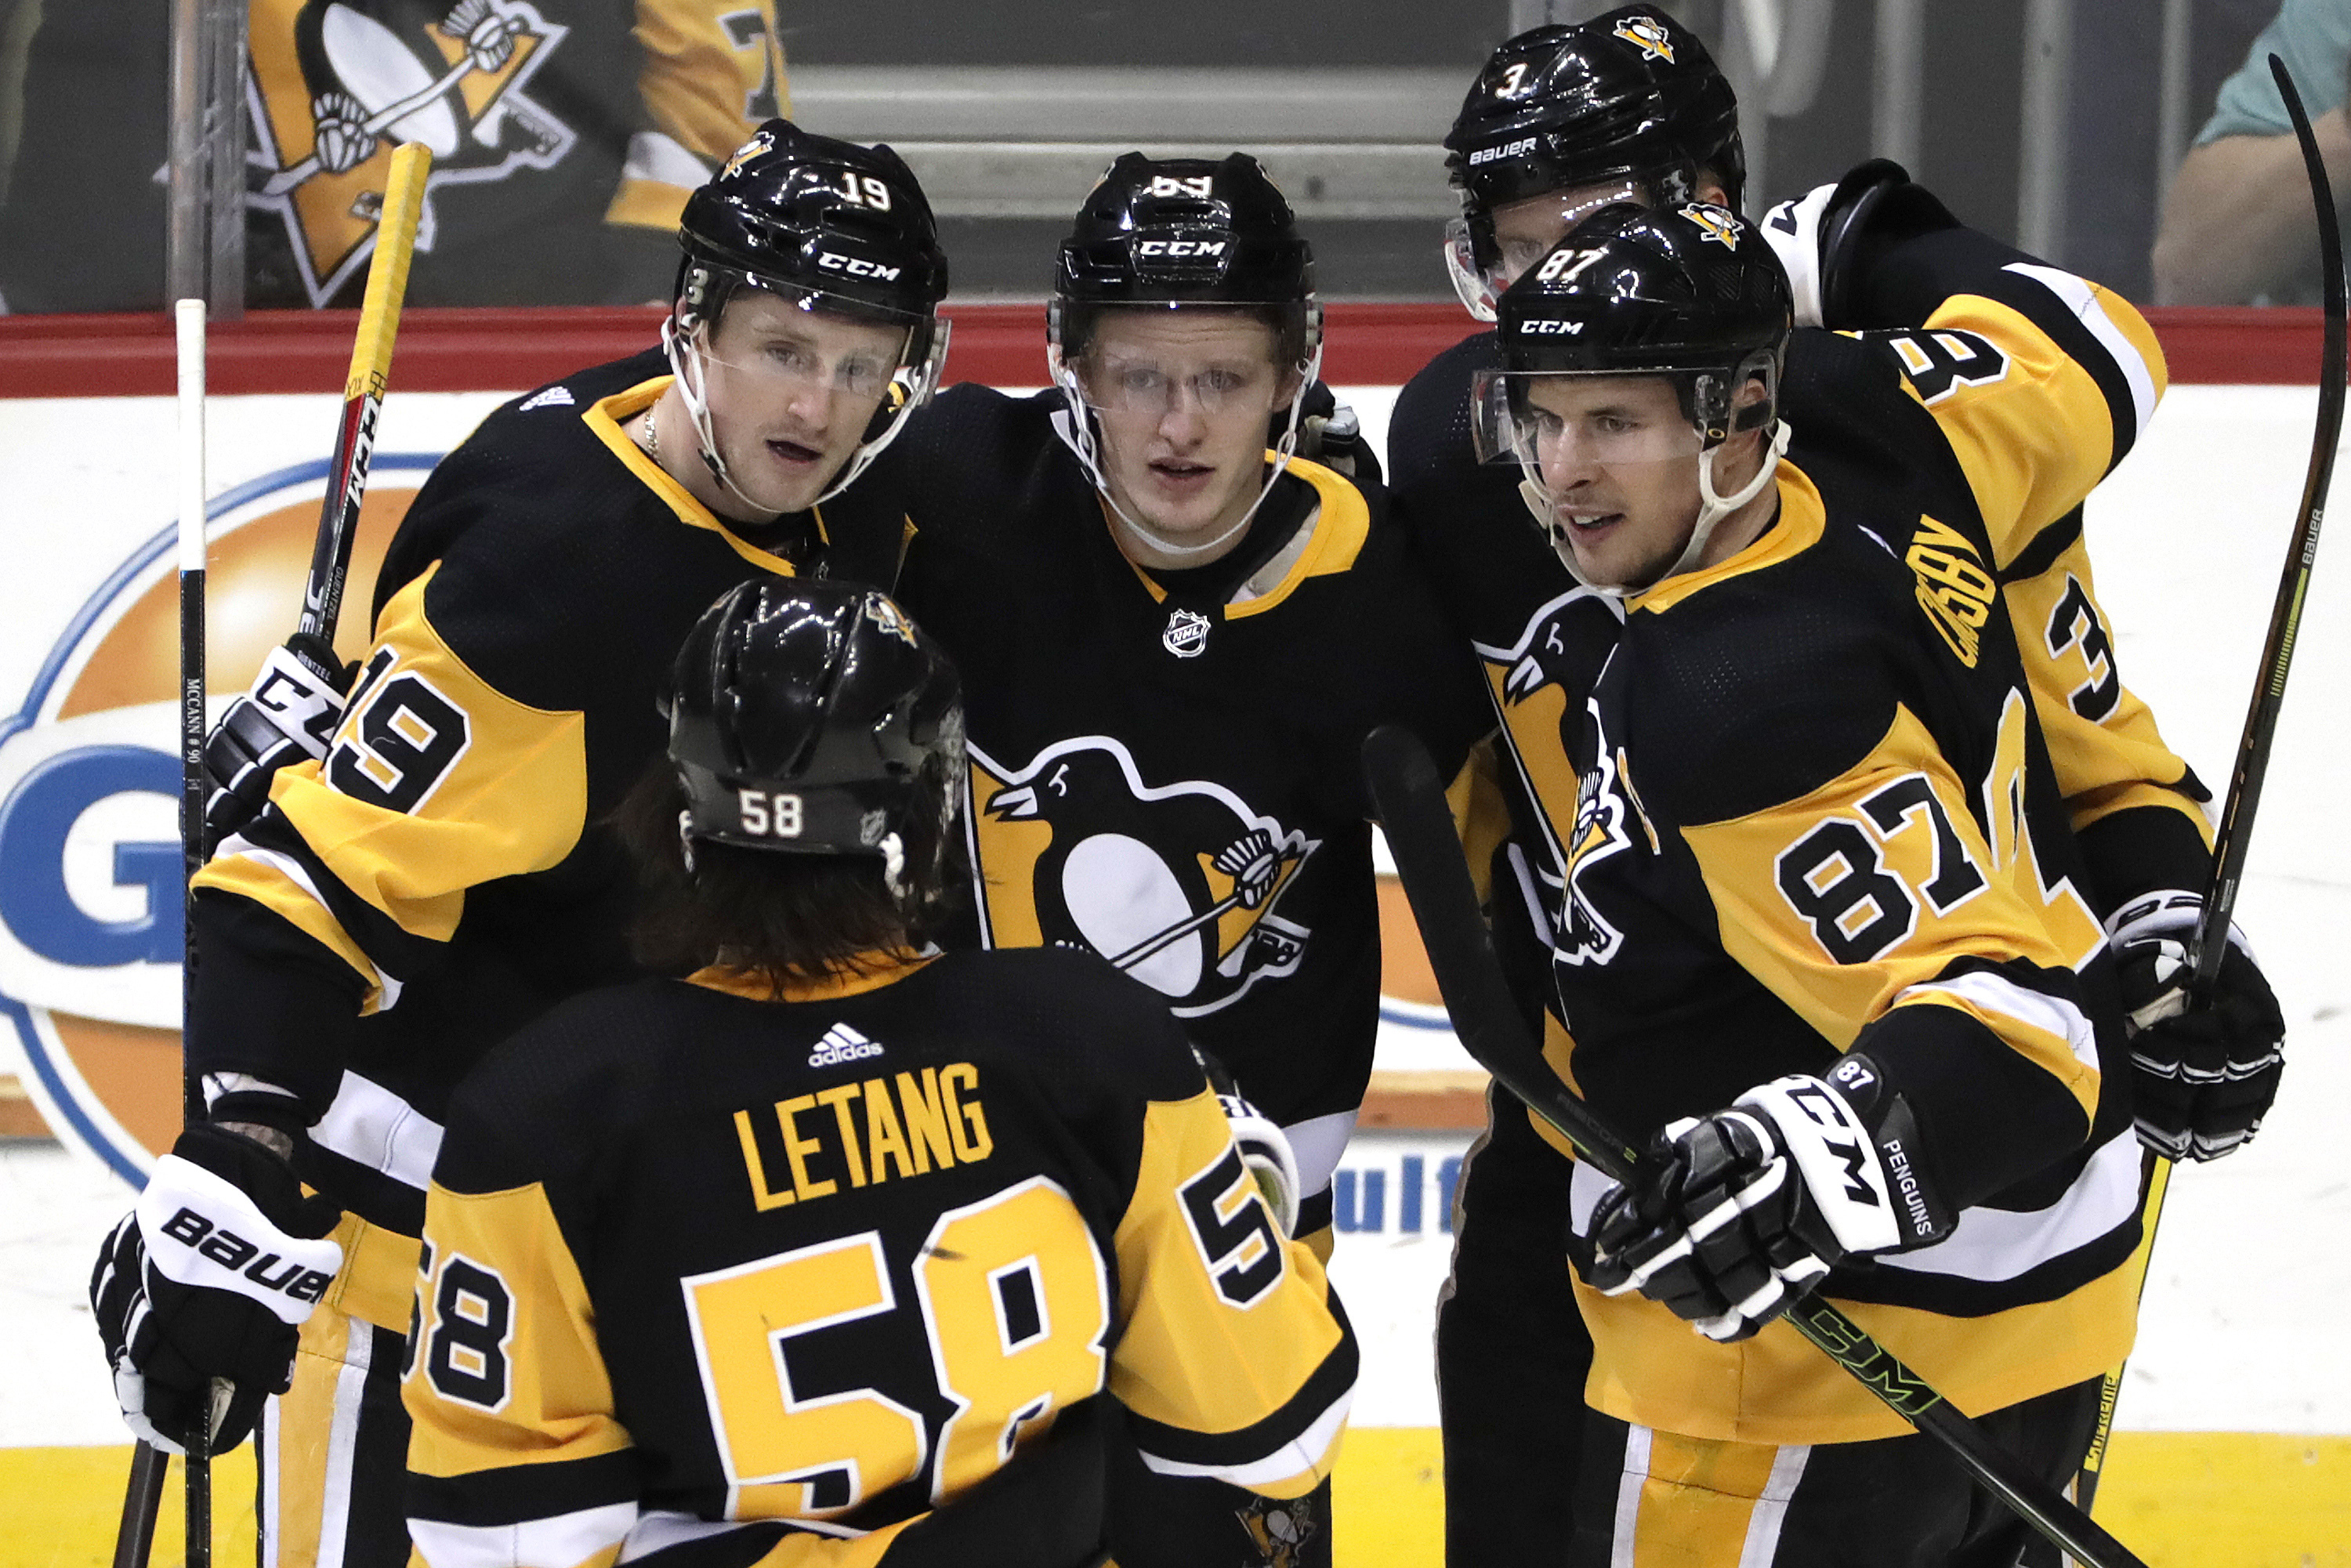 Penguins lock up playoff berth with 4-1 win over Red Wings